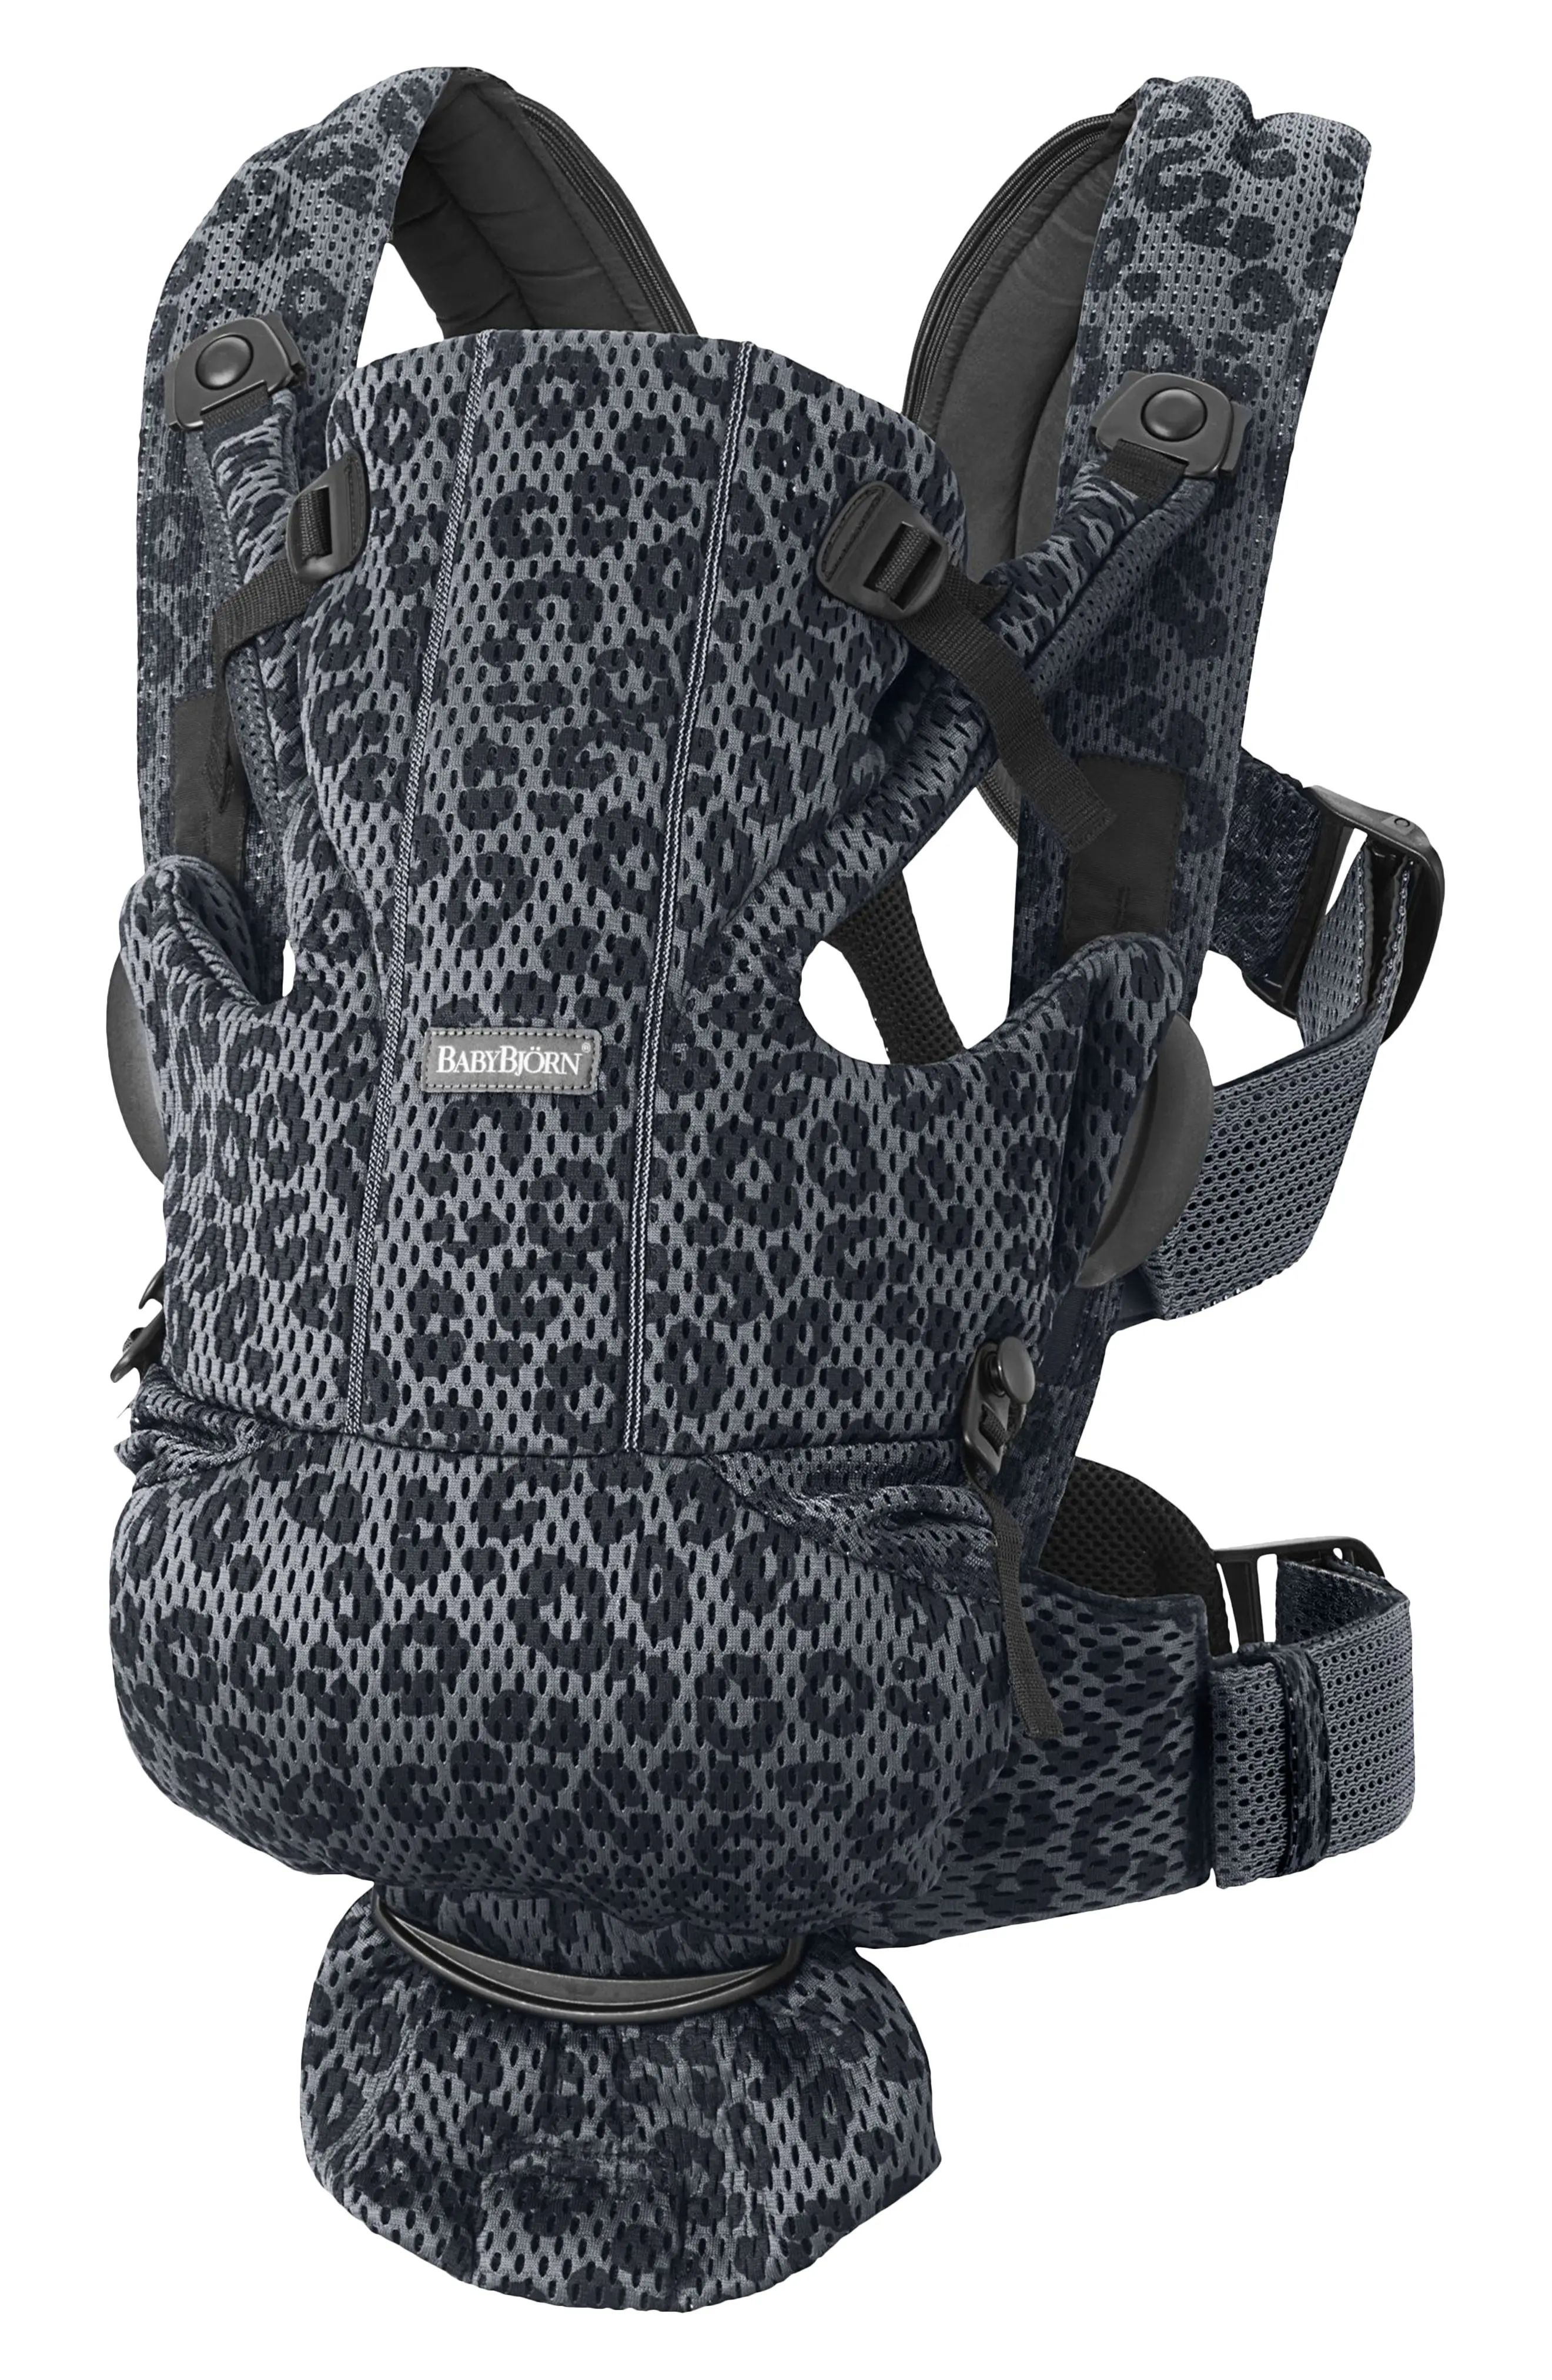 BabyBjorn Baby Carrier Free in Anthracite Leopard at Nordstrom | Nordstrom